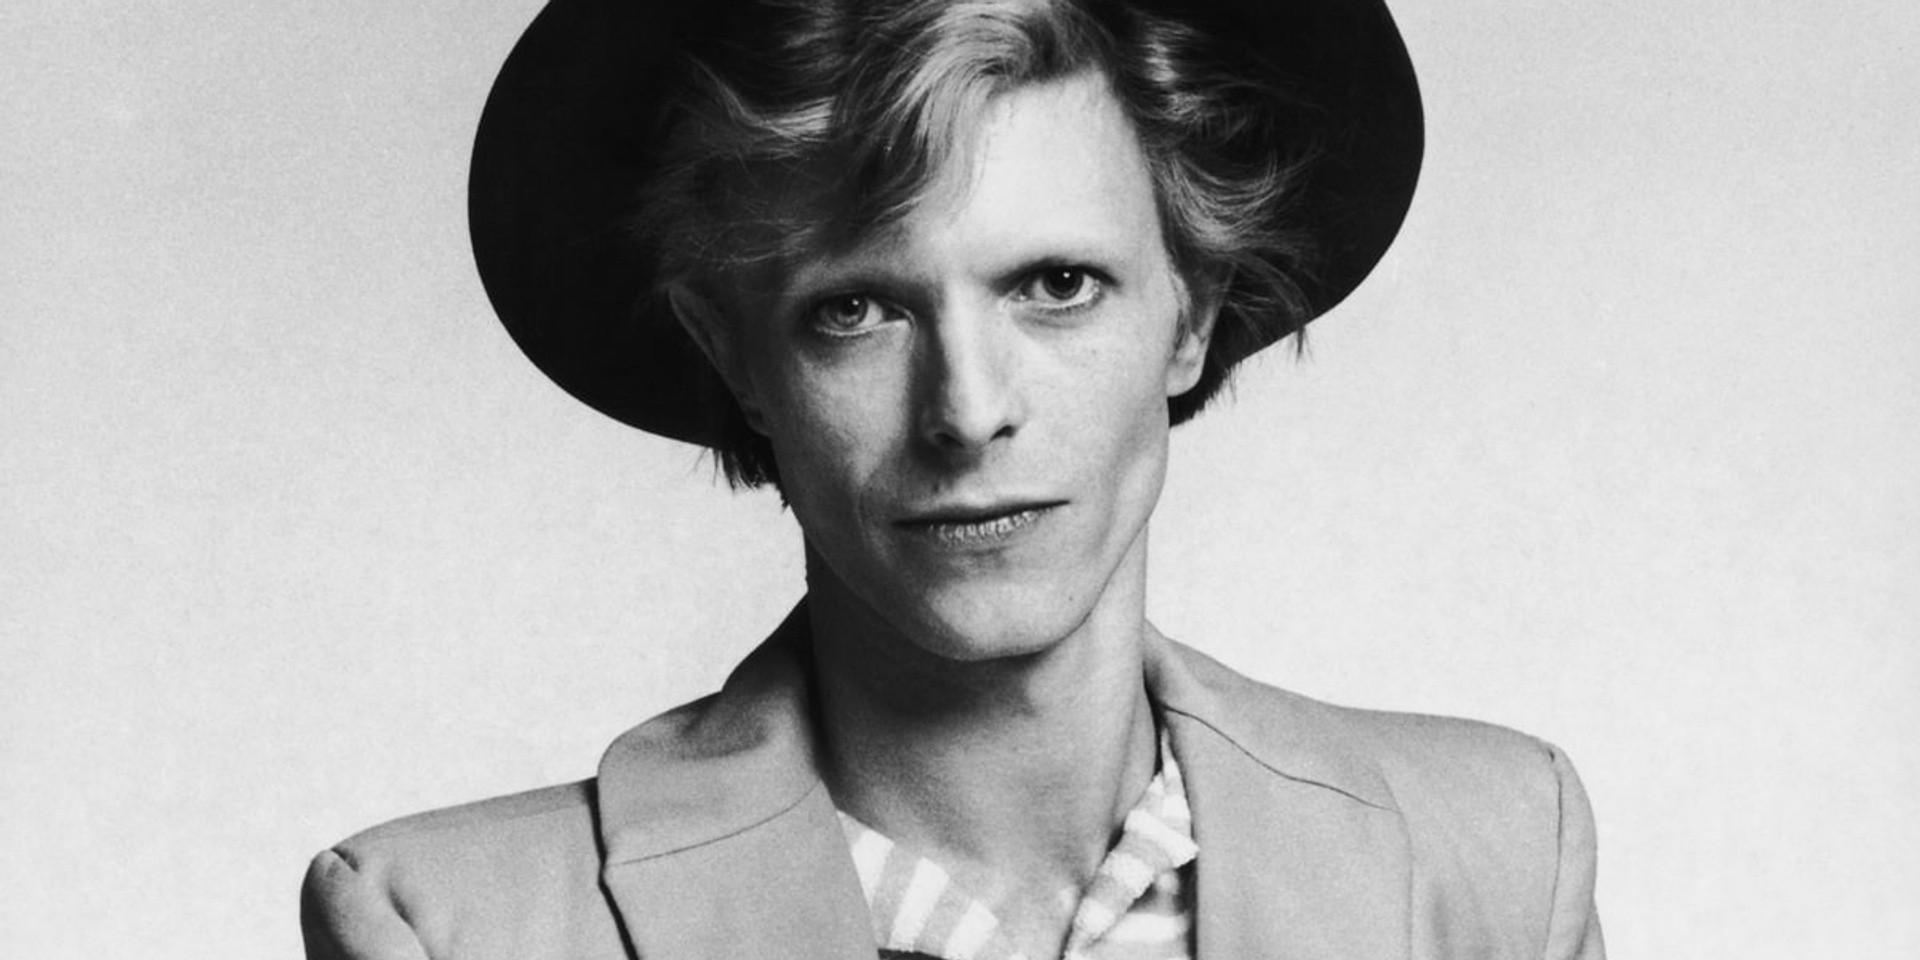 Singapore's favourite David Bowie songs, according to Spotify